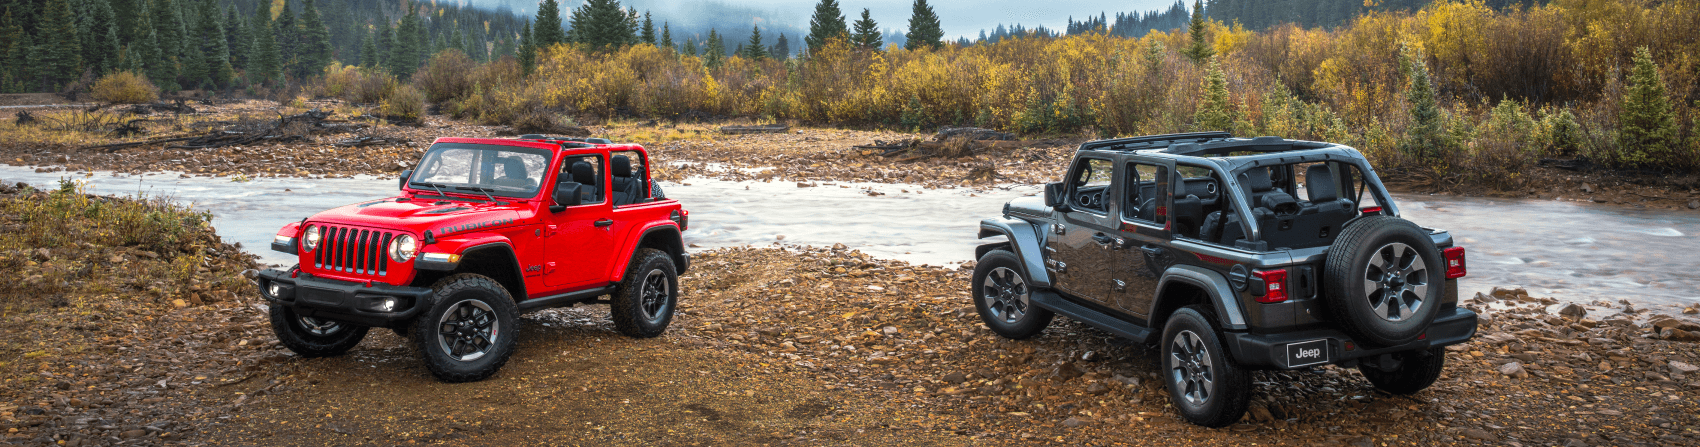 Jeep Wrangler Gray and Red Creek